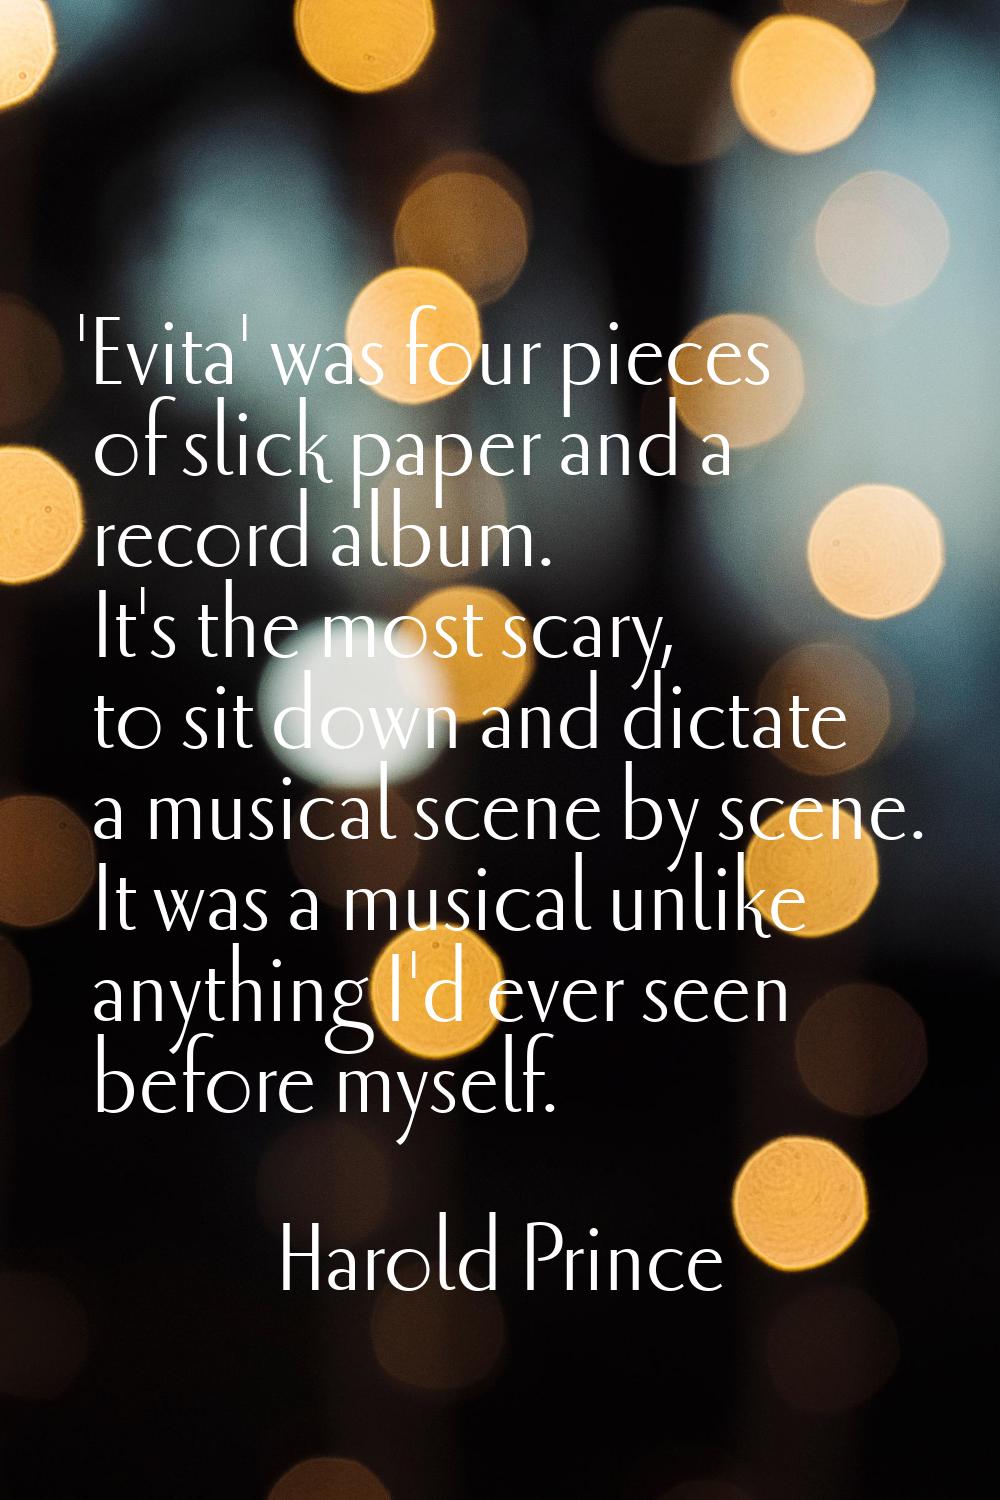 'Evita' was four pieces of slick paper and a record album. It's the most scary, to sit down and dic